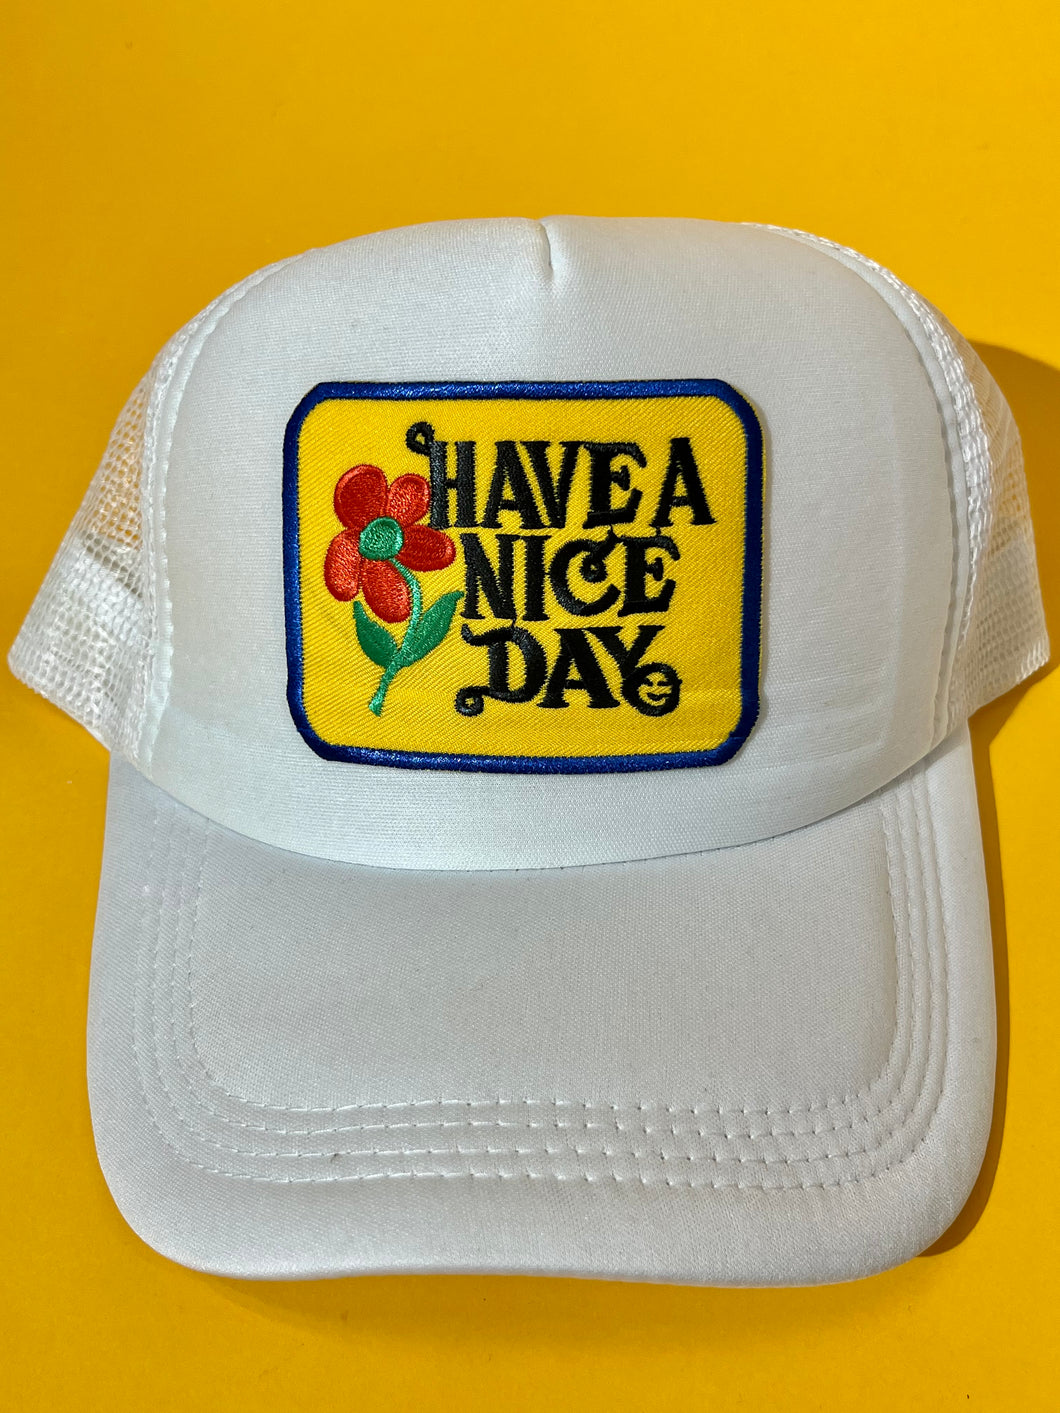 Have a nice day white trucker hat